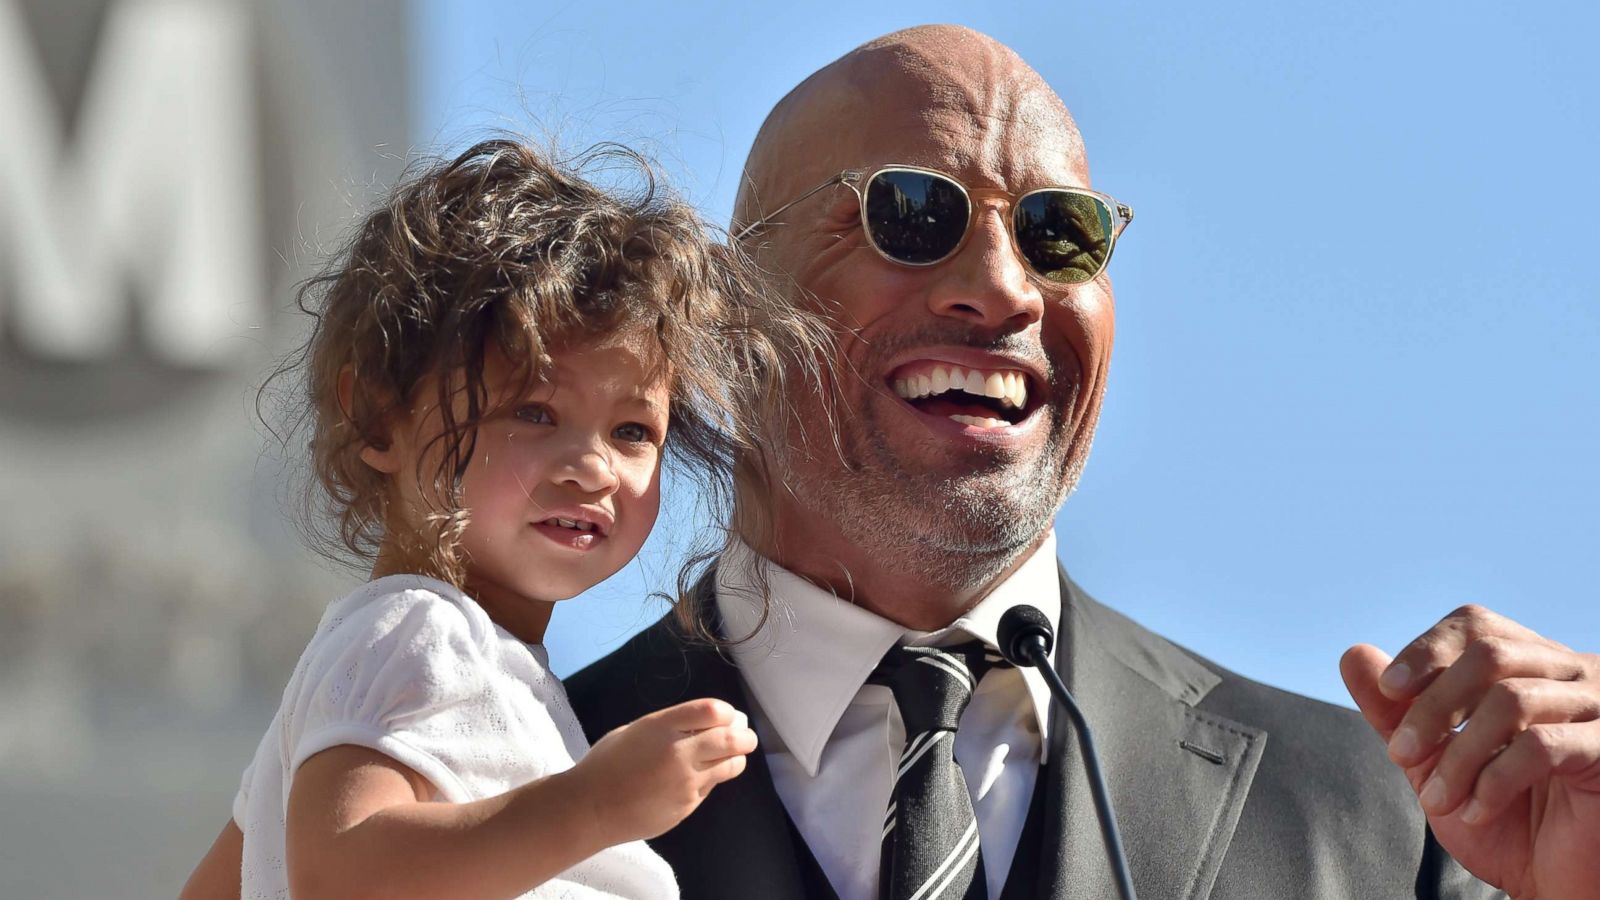 PHOTO: Dwayne Johnson and daughter Jasmine Johnson attend the ceremony honoring him with star on the Hollywood Walk of Fame, Dec. 13, 2017 in Hollywood.